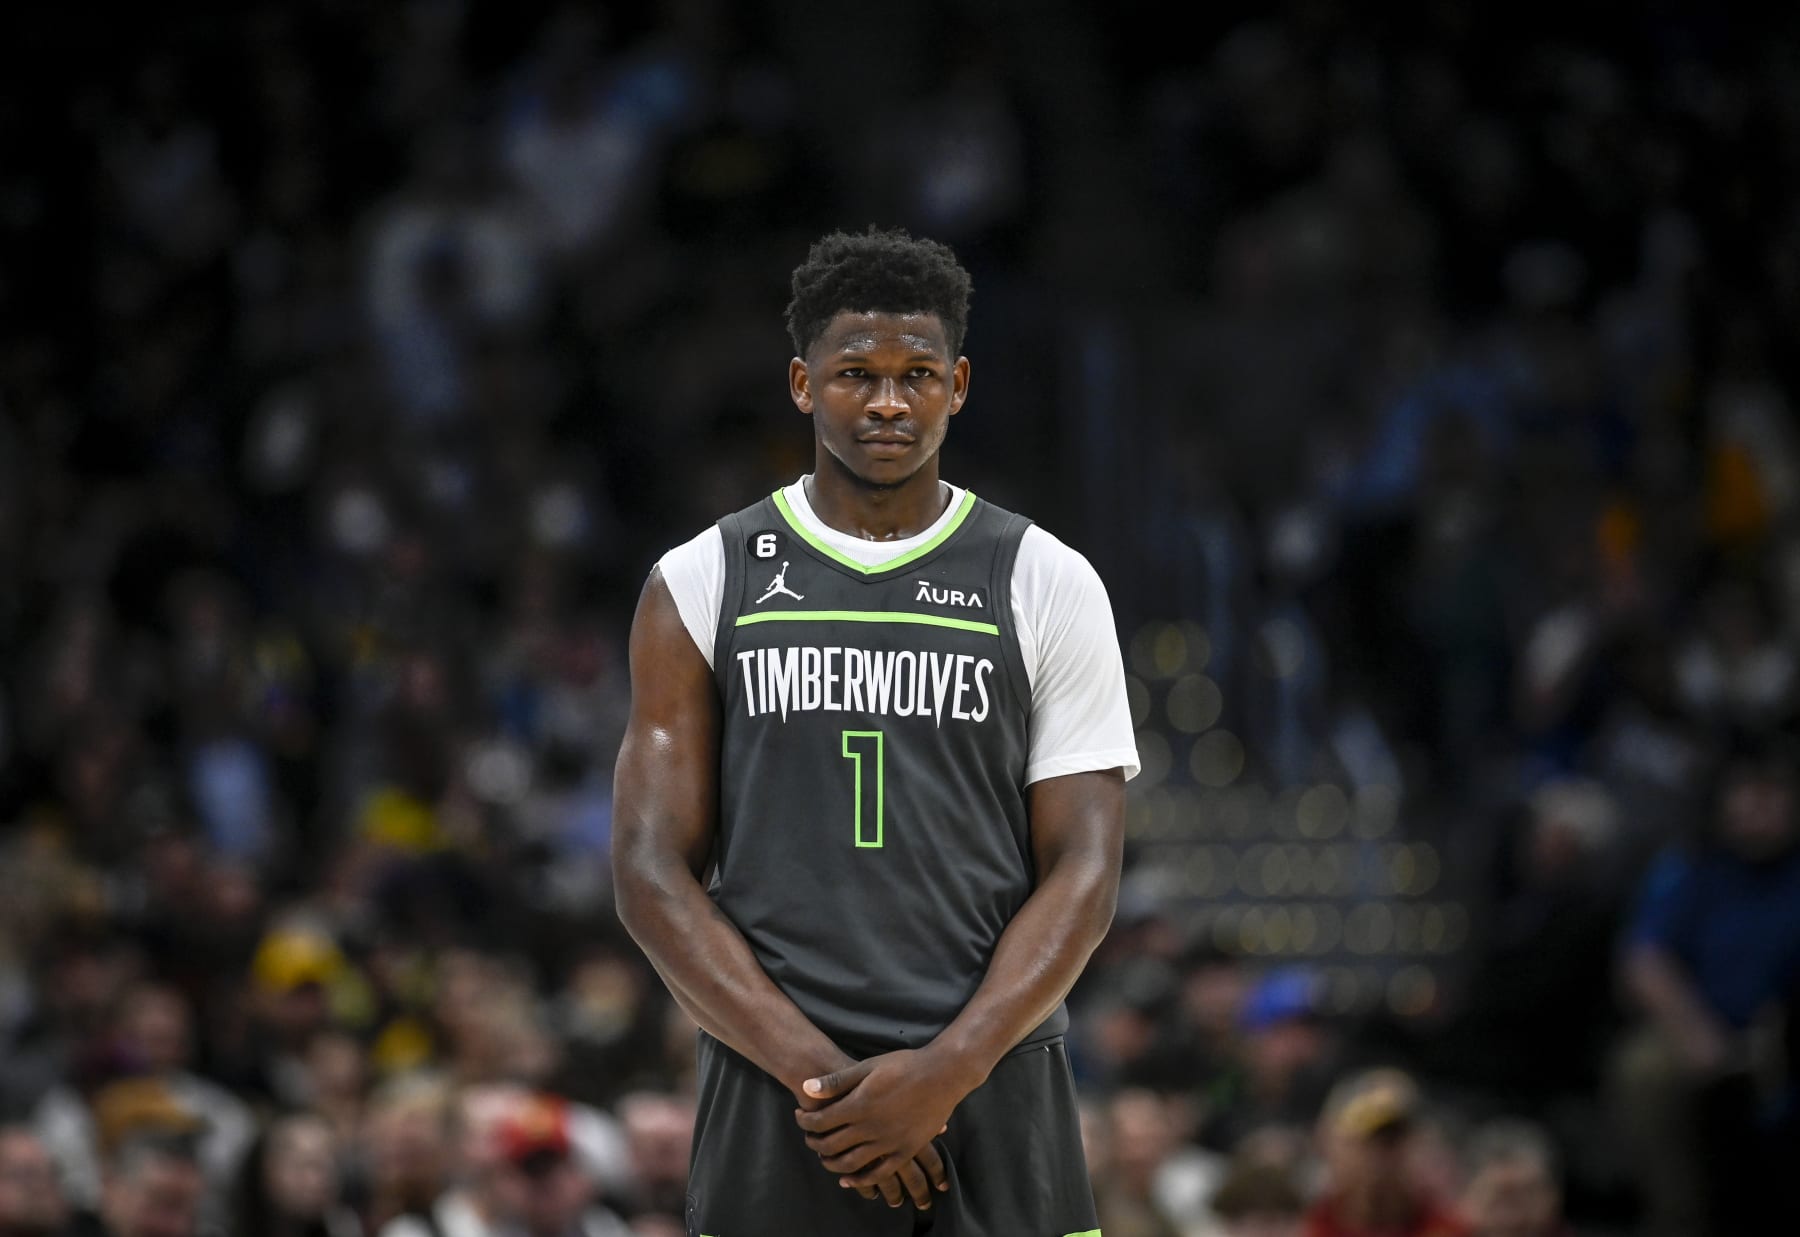 Timberwolves coach Chris Finch says Anthony Edwards got taller